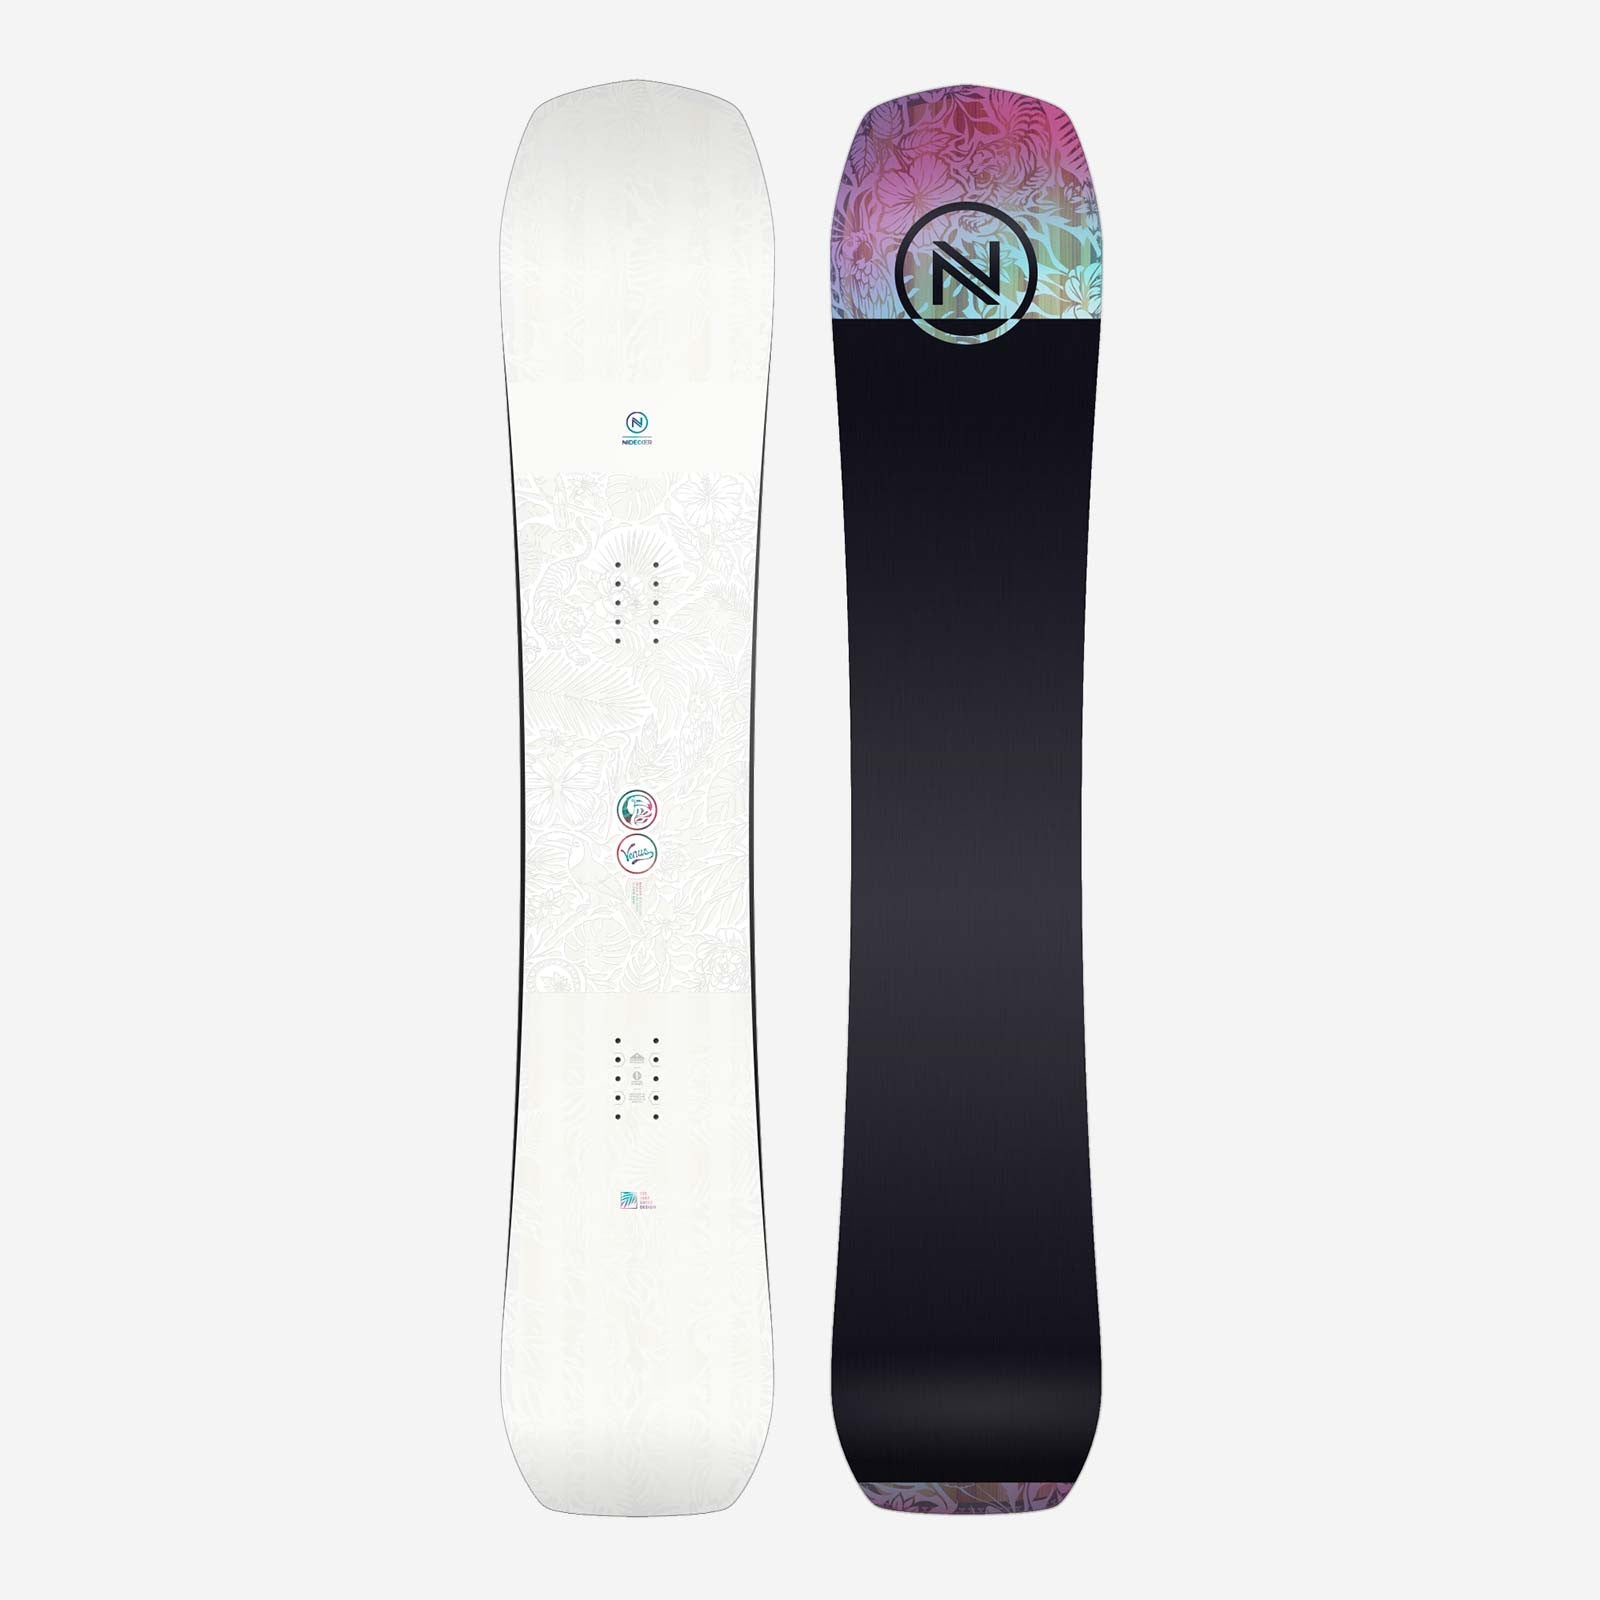 With an upgraded shape, the ever-popular Venus is equipped for a new generation of women to tackle the whole mountain. We’ve given it a blunter, directional silhouette with a 10 mm set back stance that makes it easier to surf through deep snow but which is versatile enough for some switch riding if you like to get creative on side hits or take a few laps through the park.